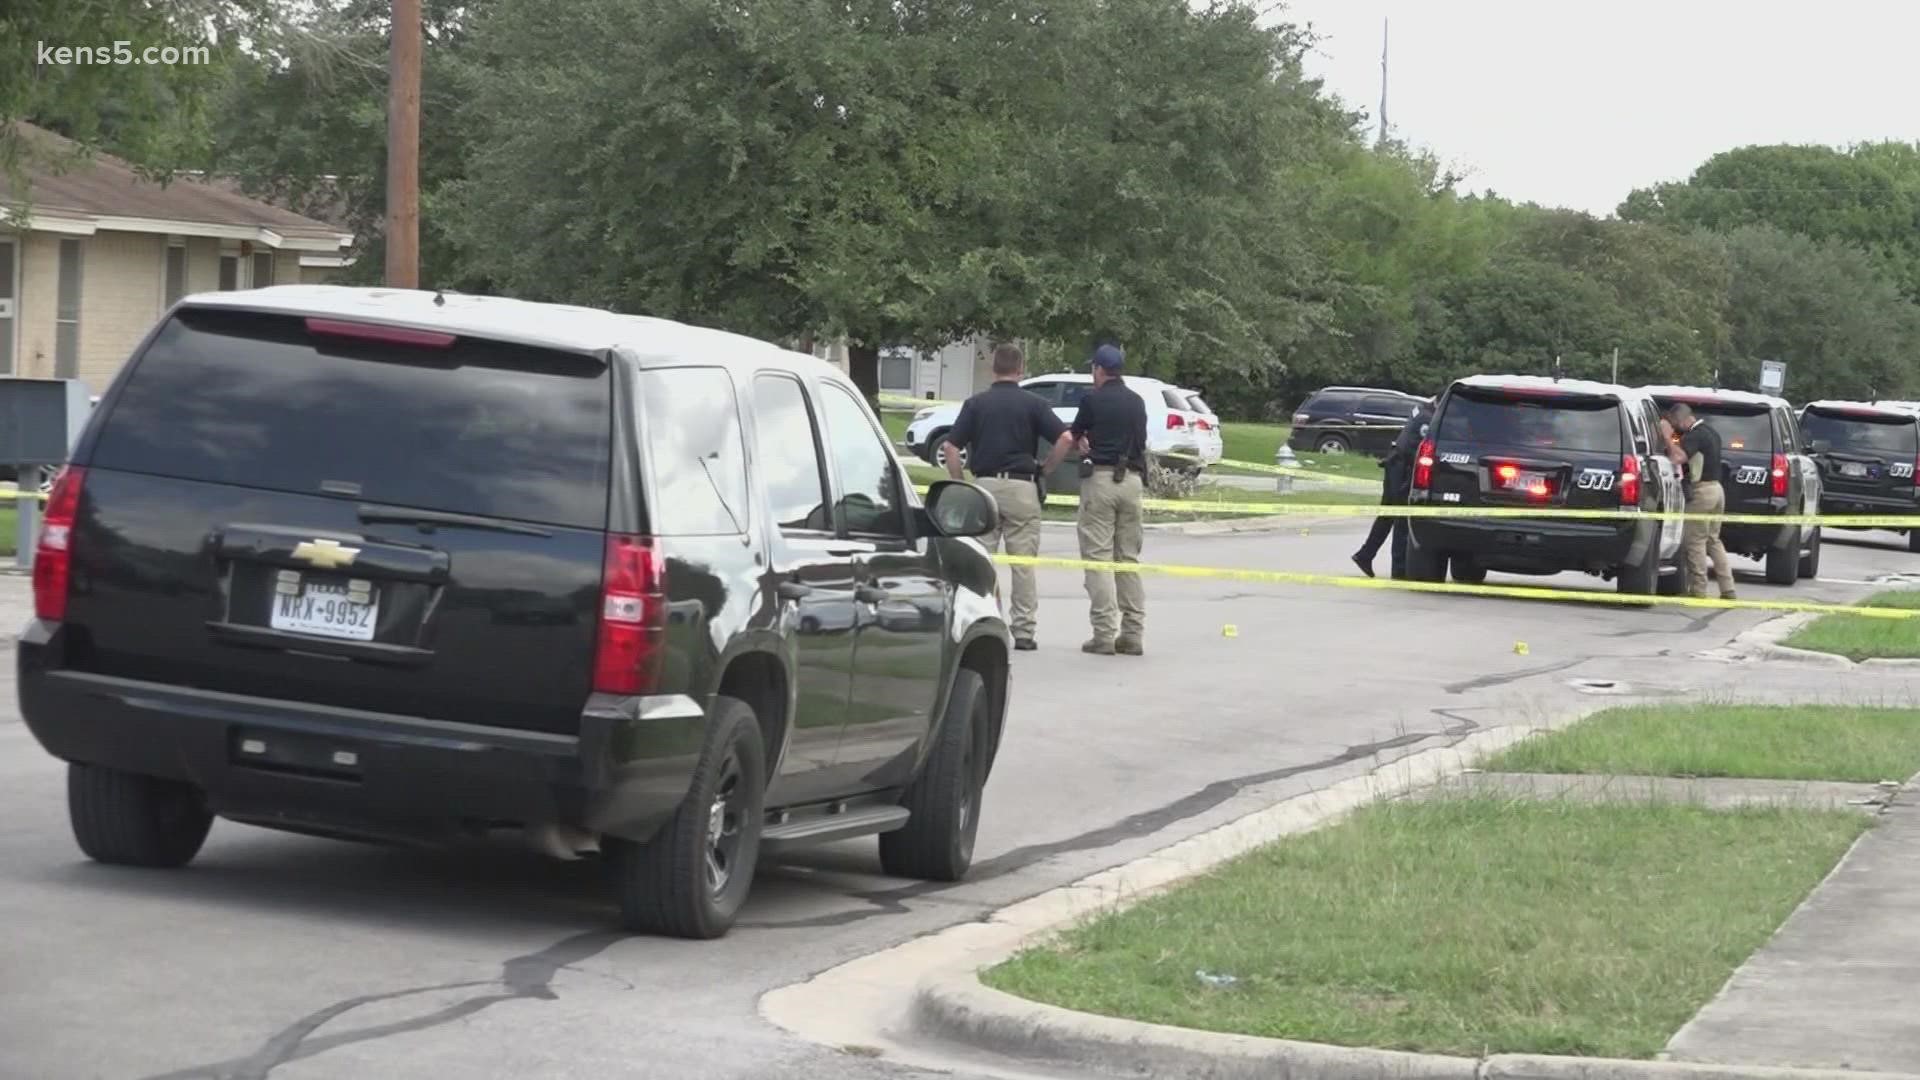 The officer was transported to a San Antonio hospital with non life-threatening injuries.